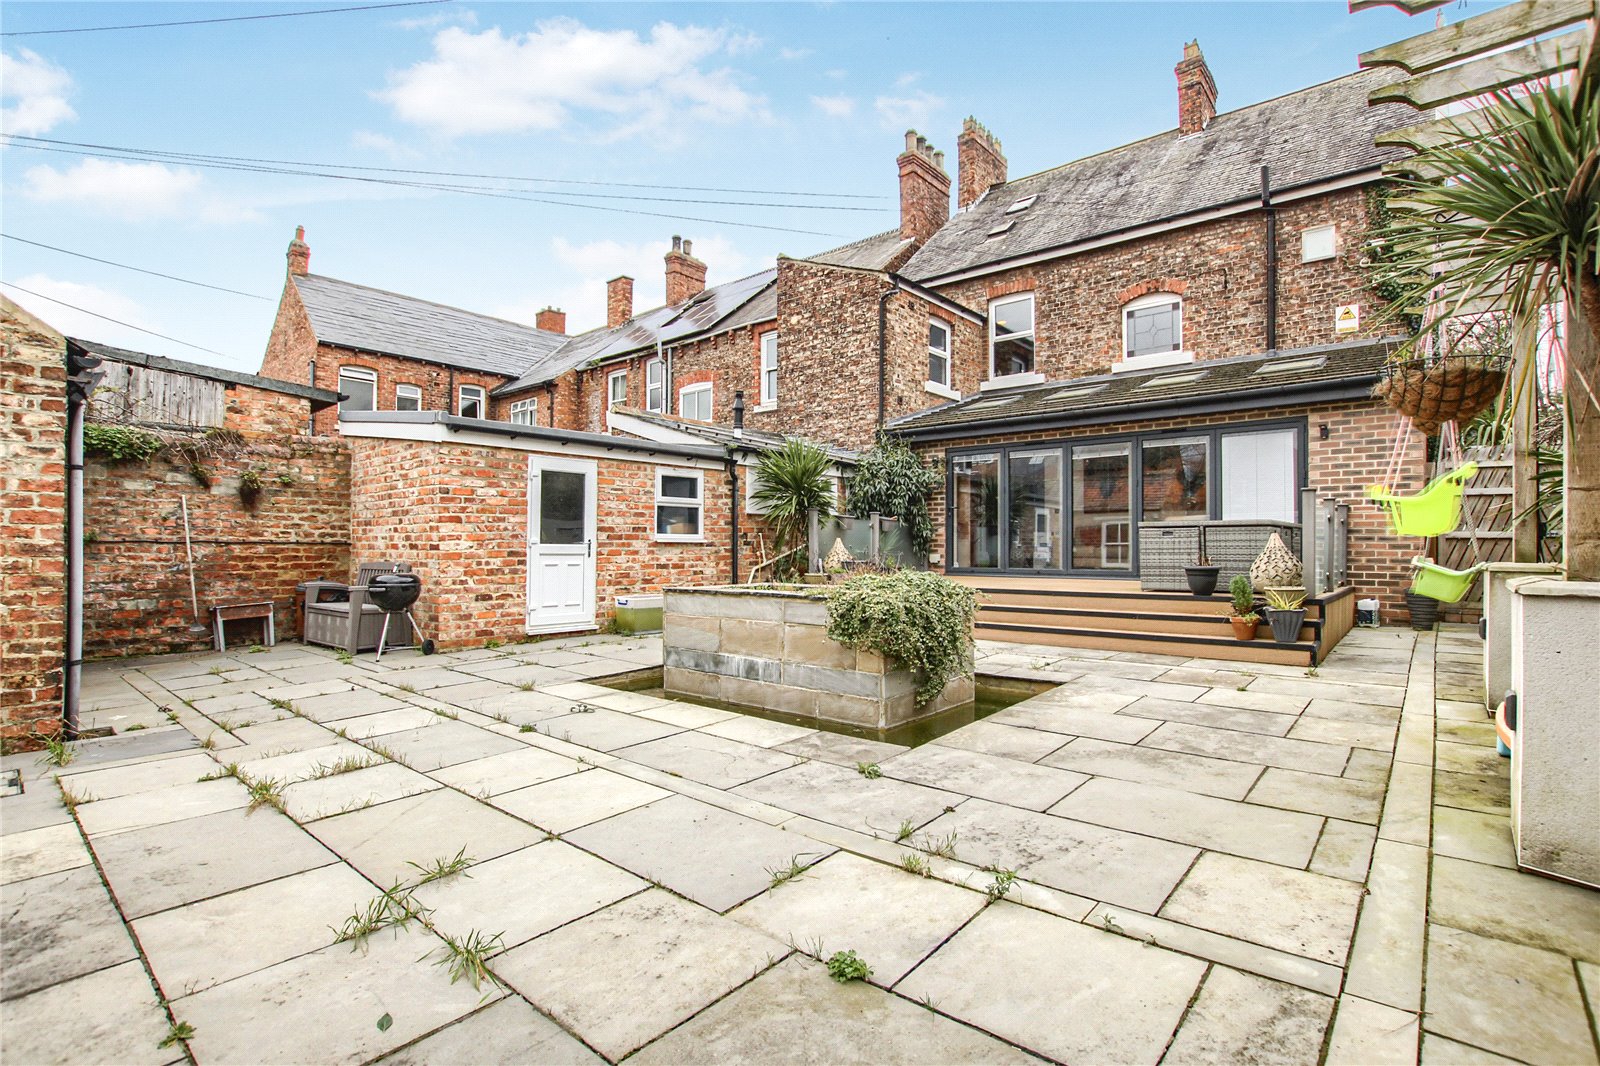 5 bed house for sale in The Avenue, Linthorpe 1